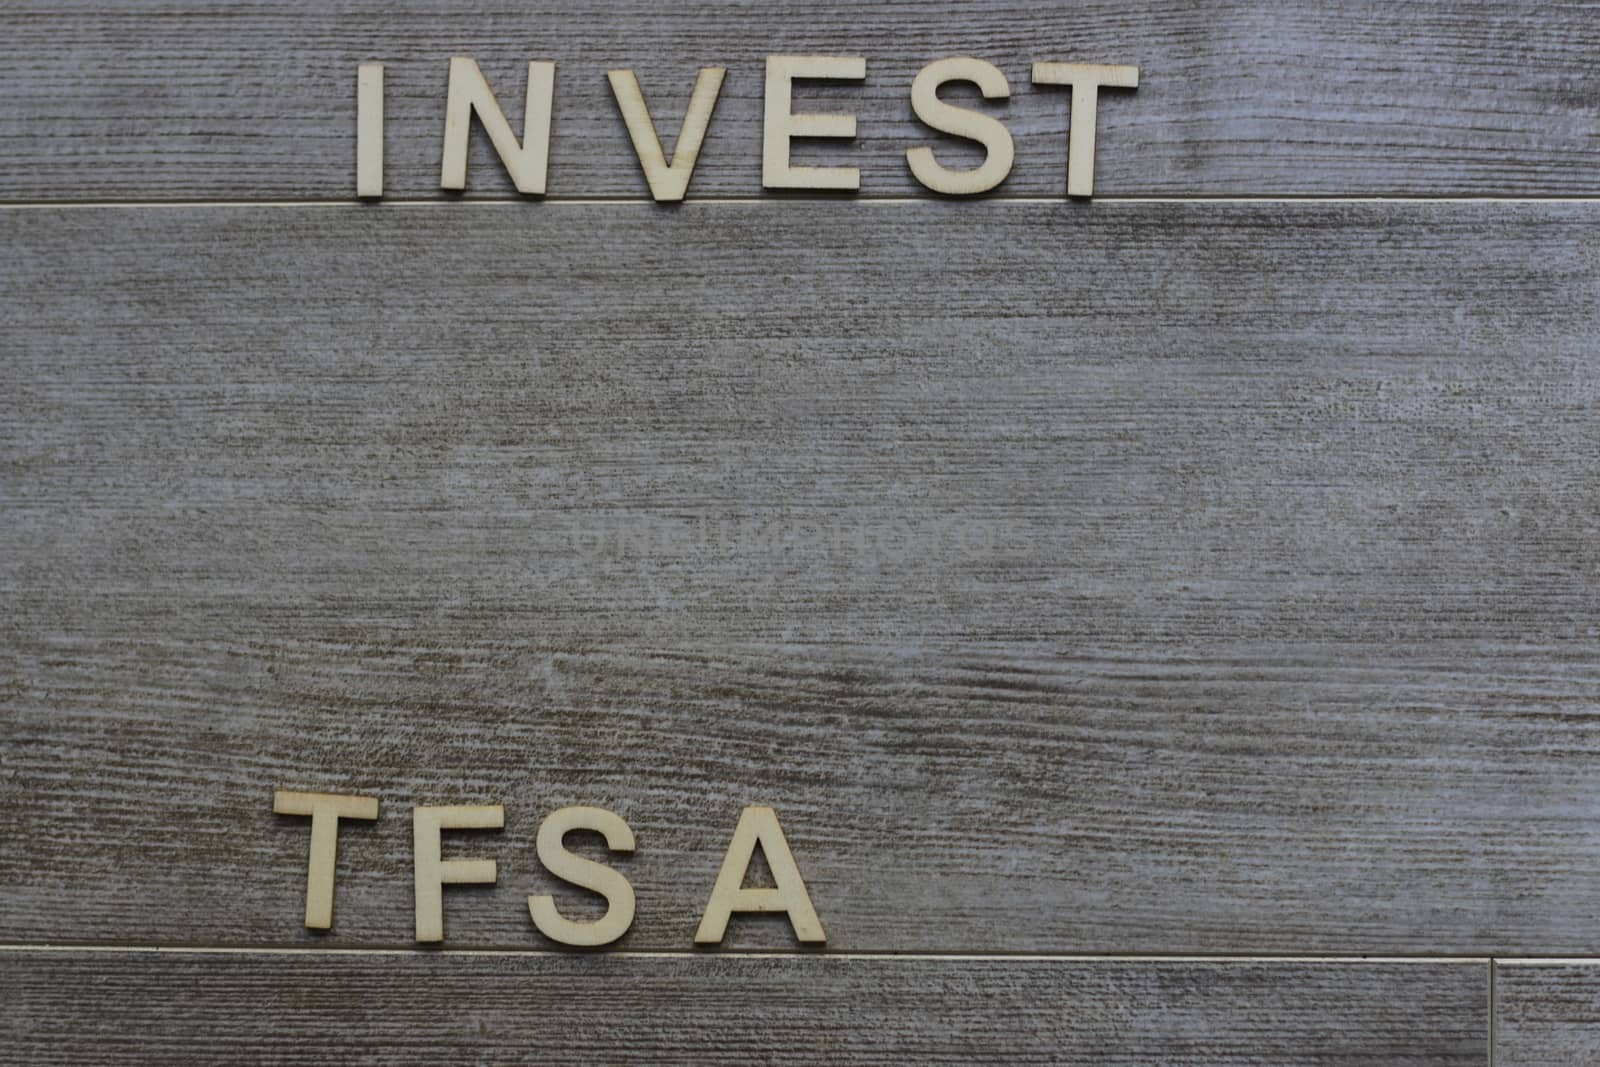 invest in a tfsa theme. the tfsa stands for tax free savings account in Canada by mynewturtle1